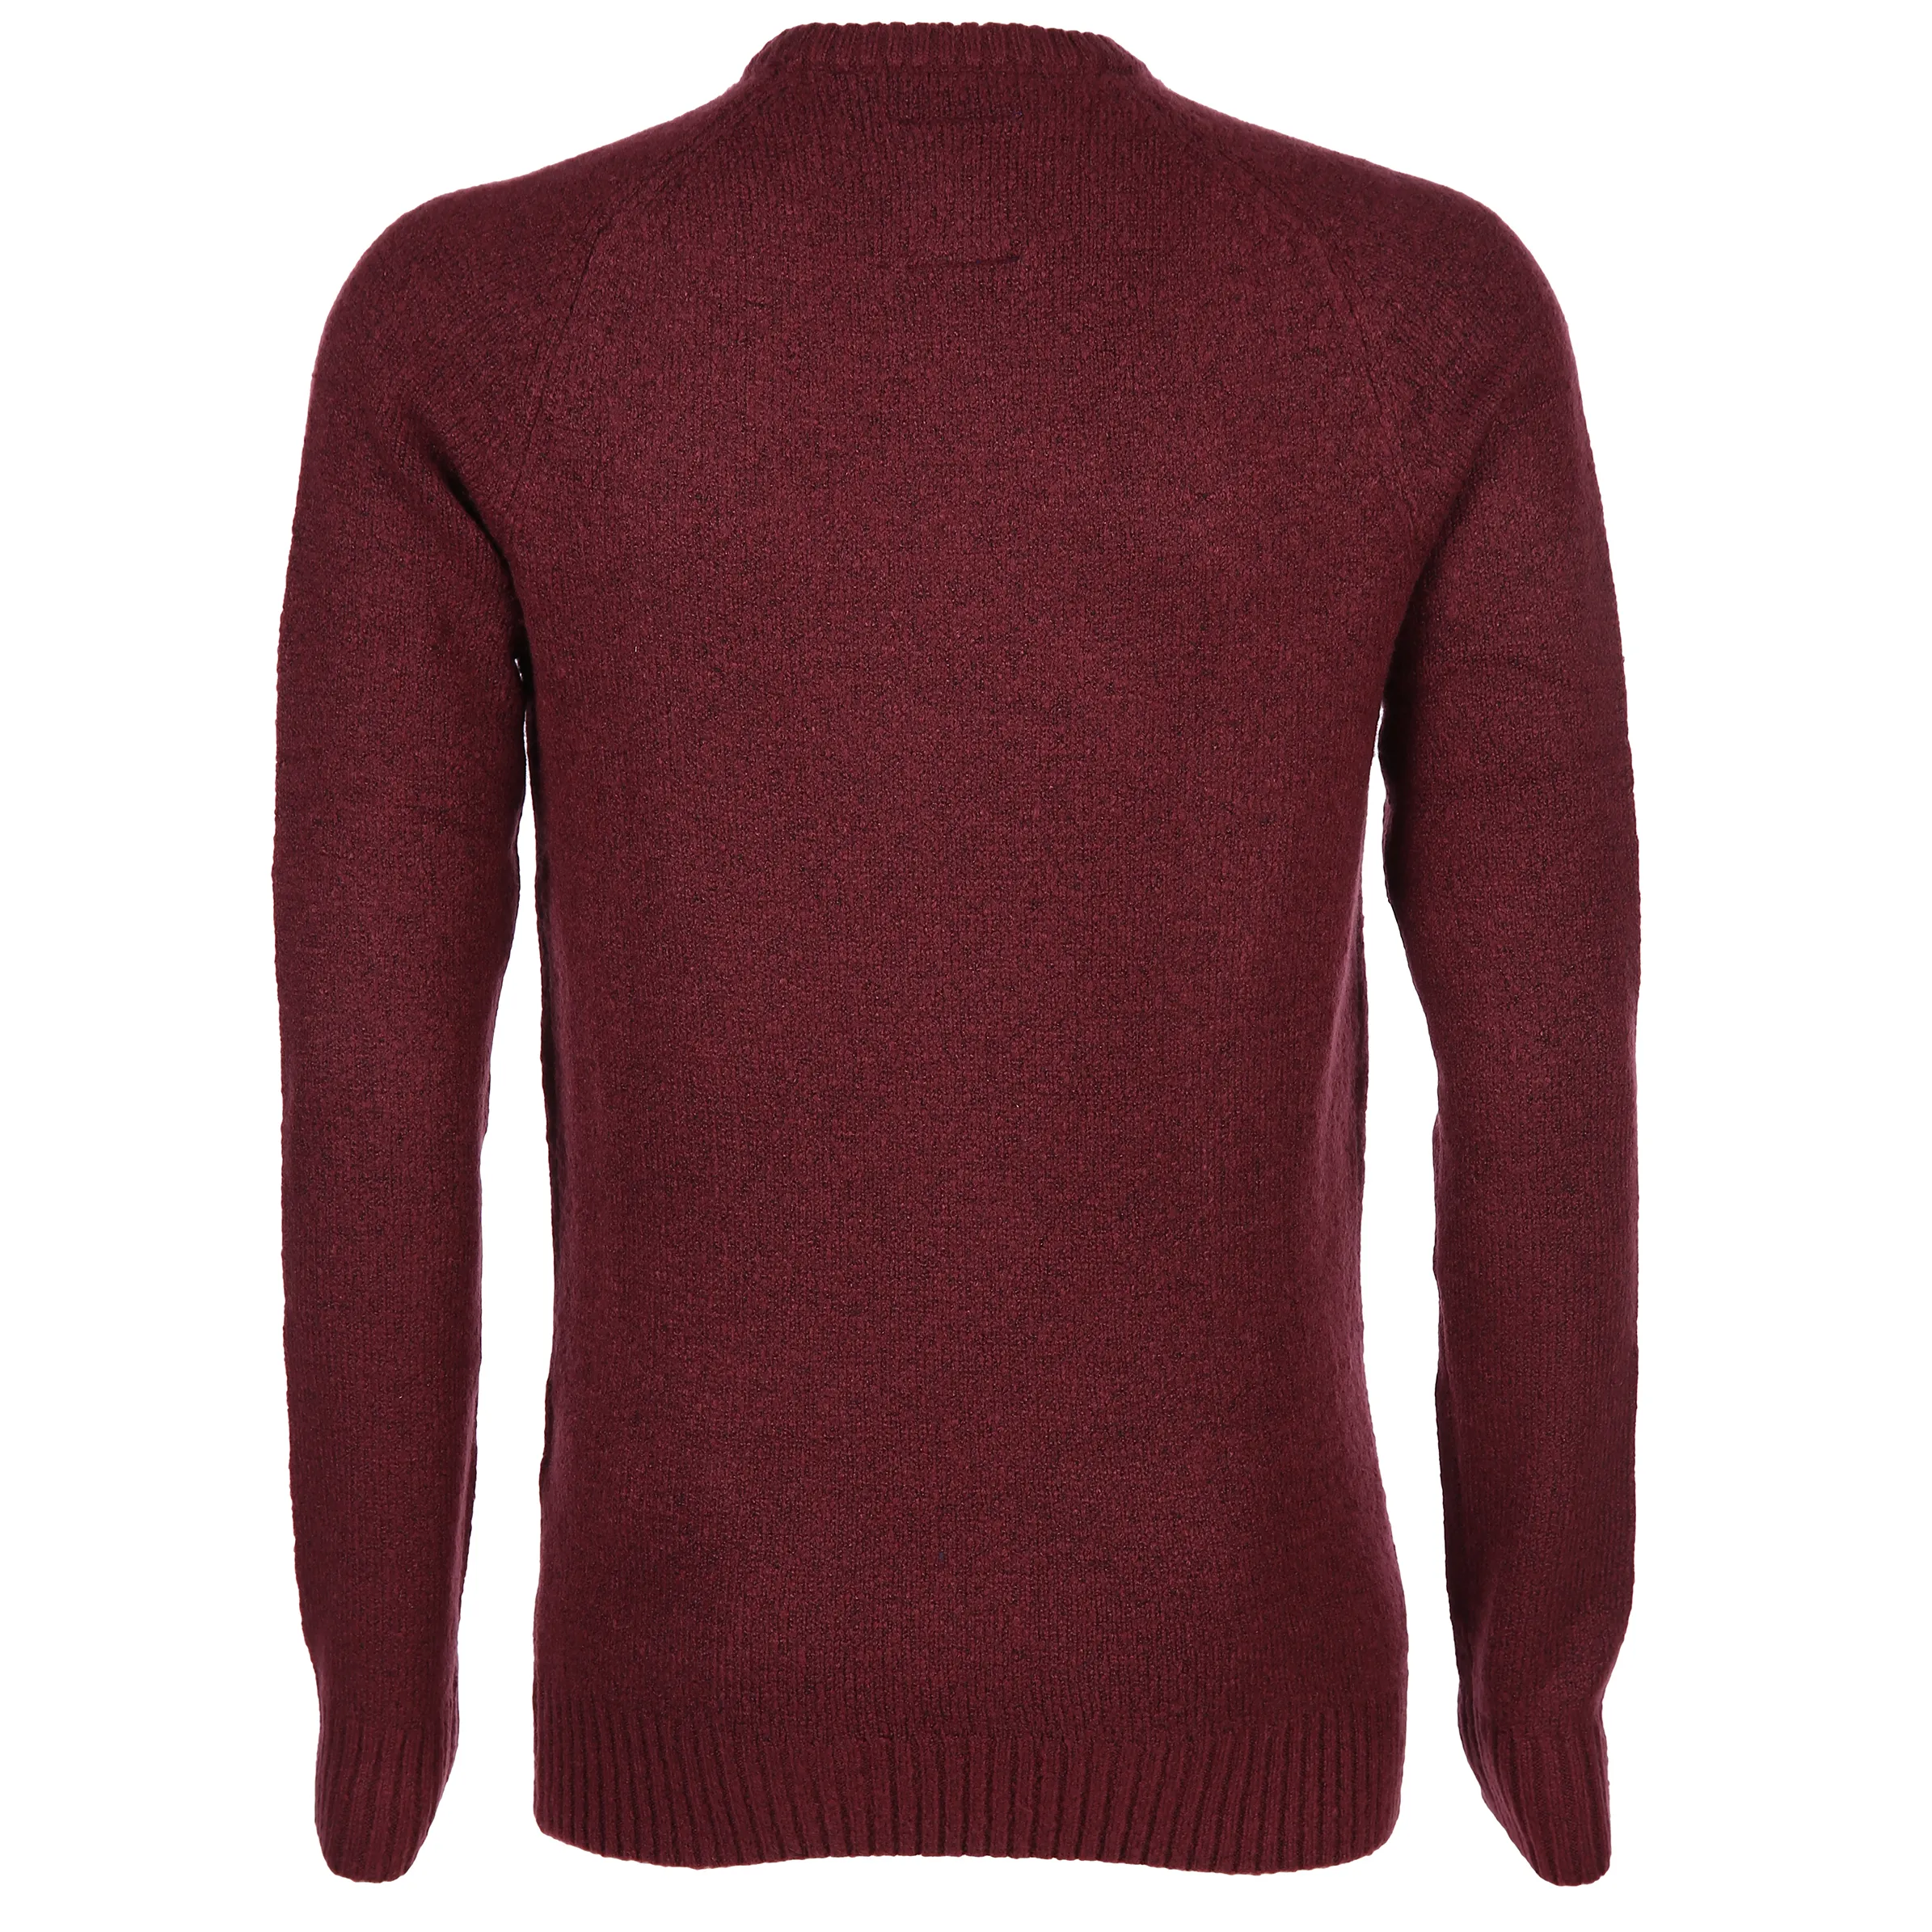 Tom Tailor 1005645 cosy knitted sweater Rot 800010 10308 2